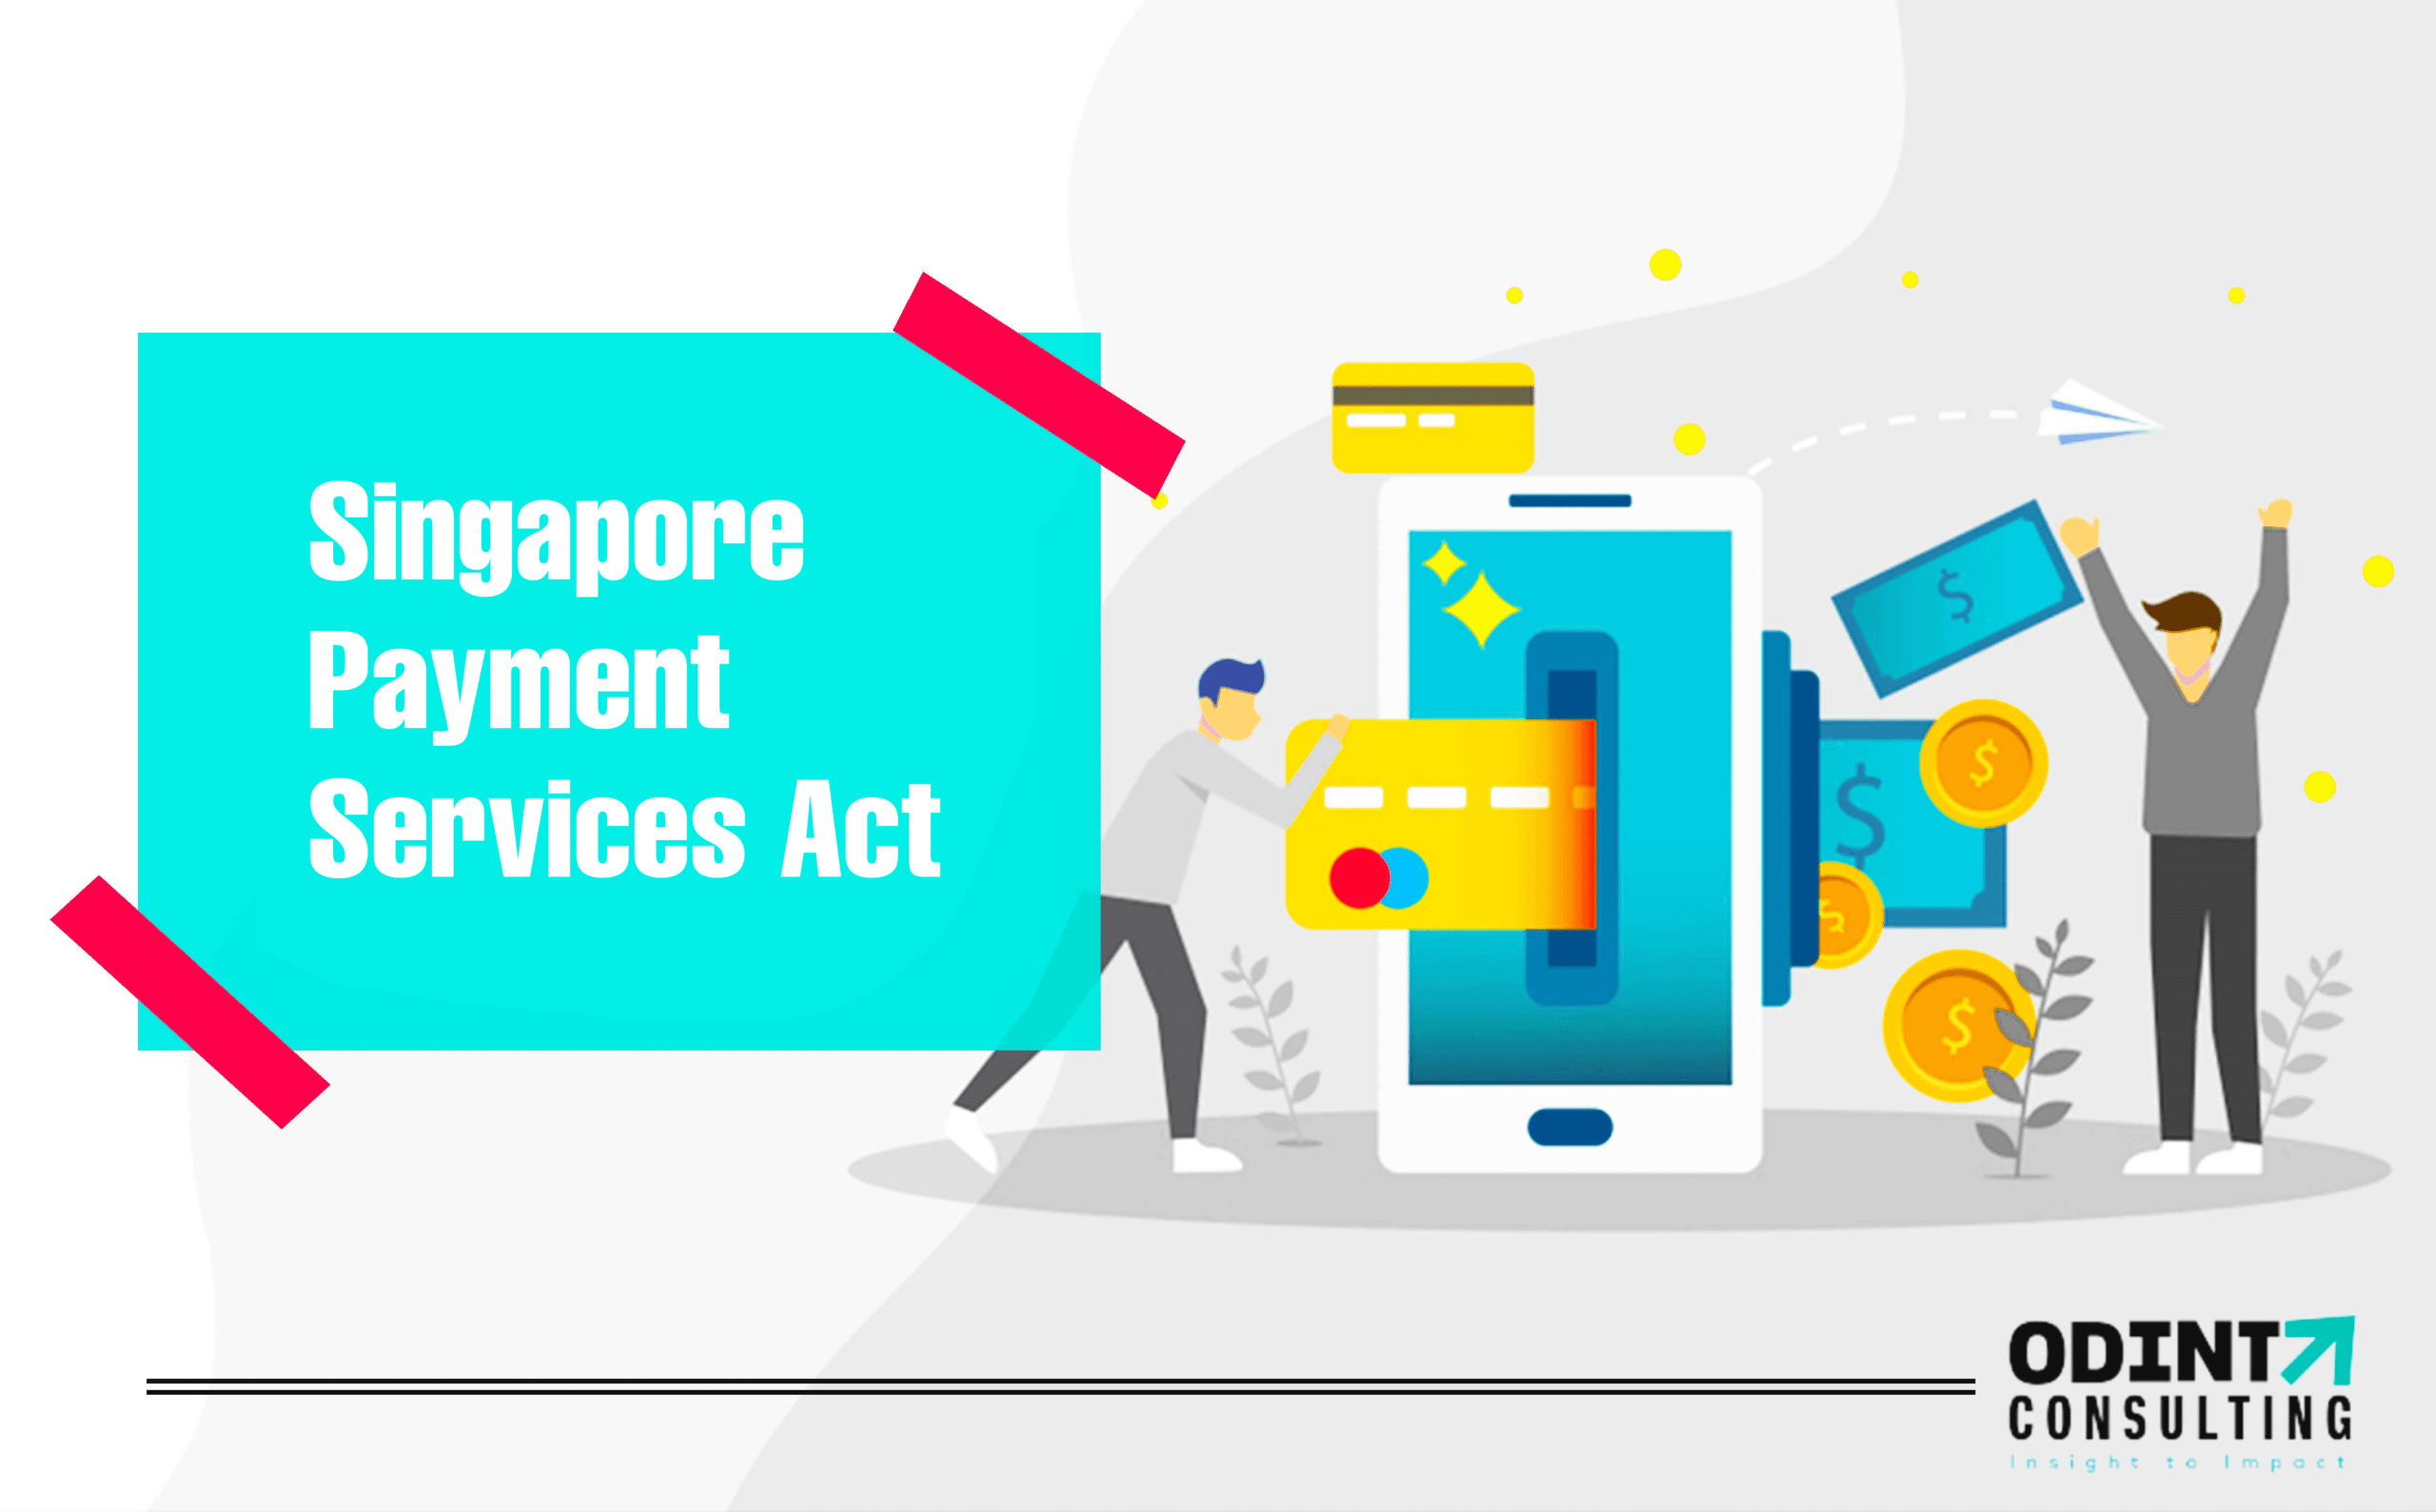 Singapore Payment Services Act: Objectives & Licenses Classification